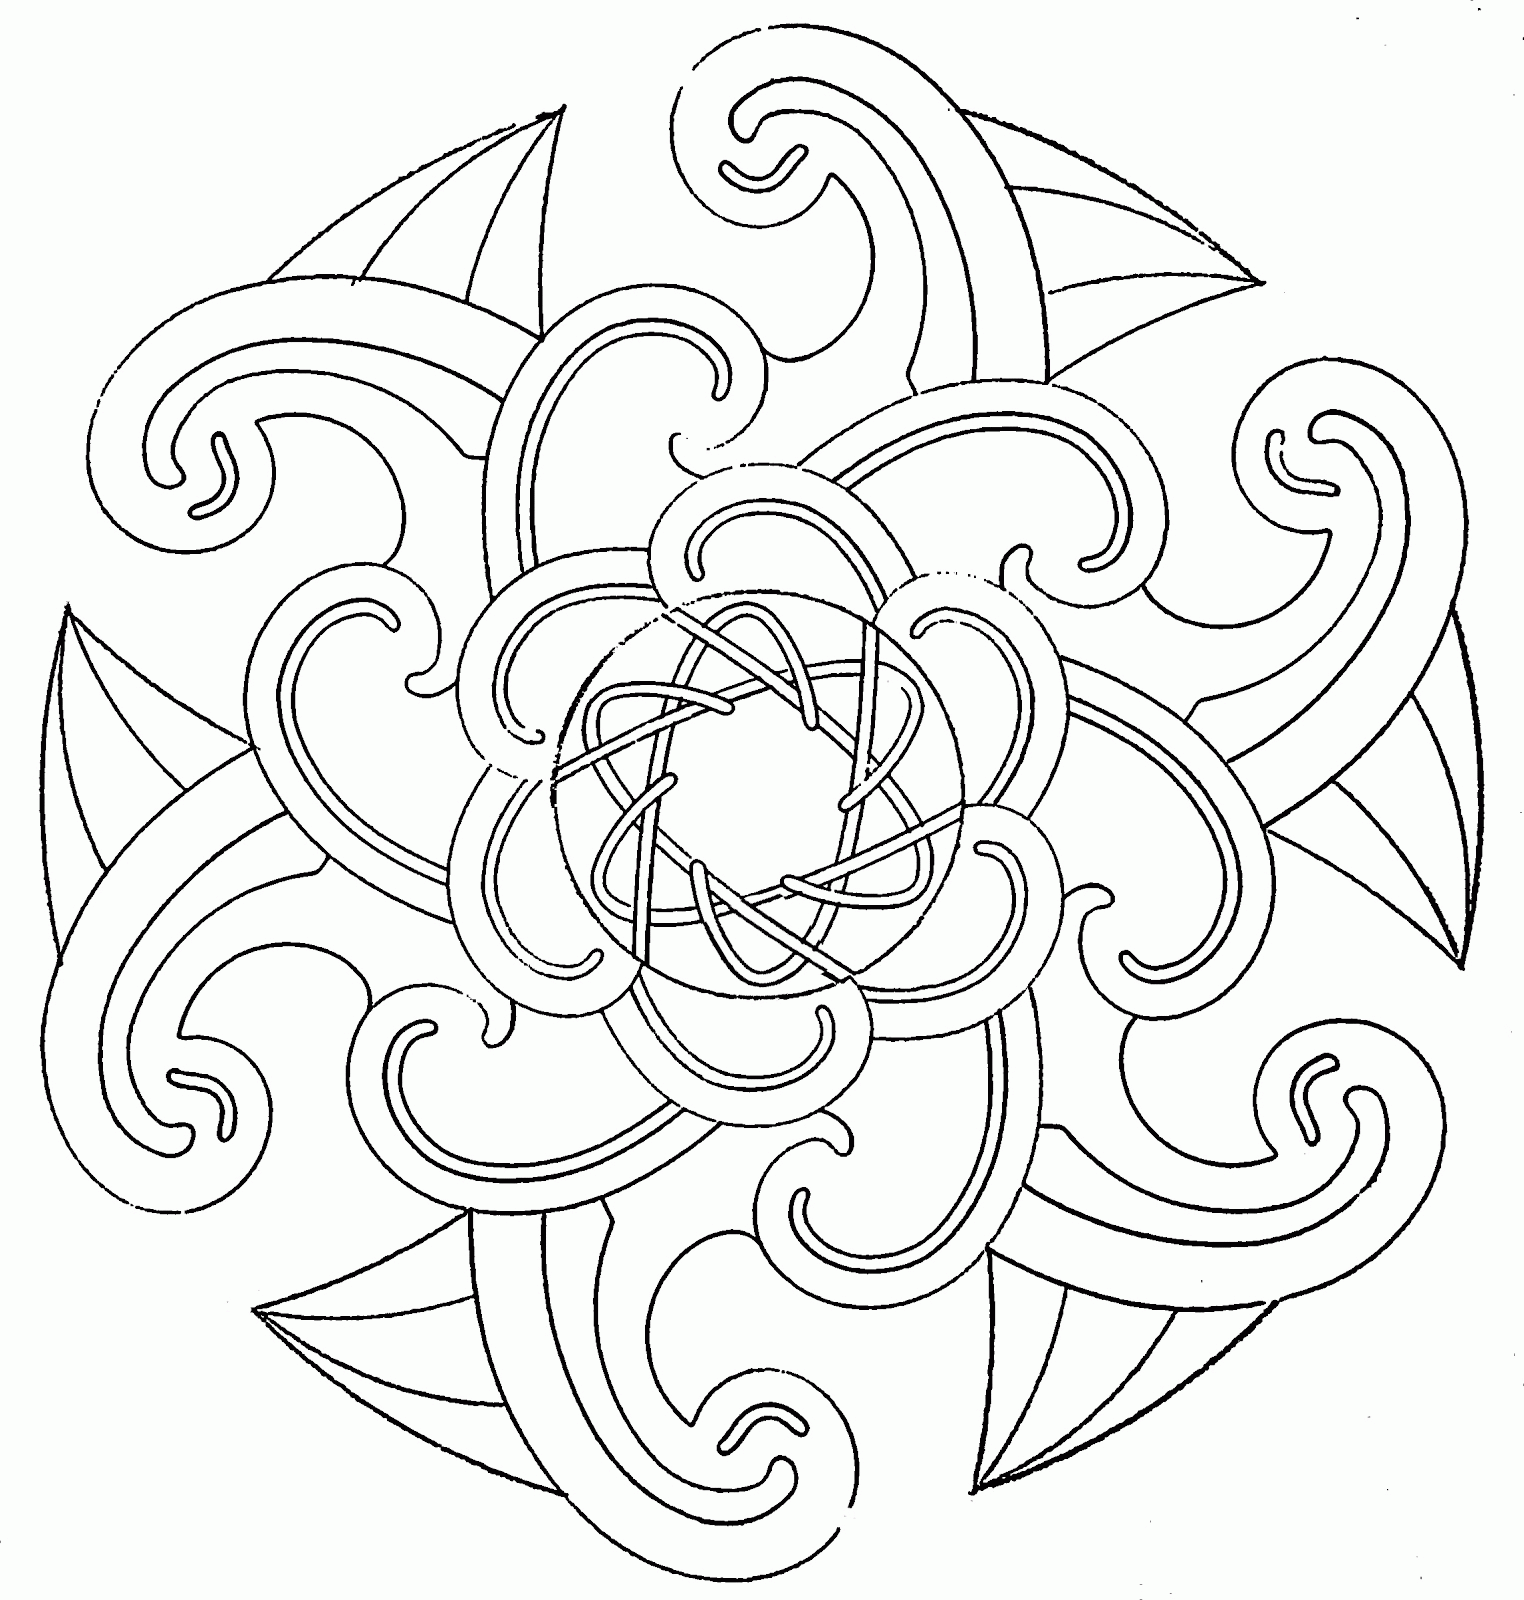  Cool Design Coloring Pages 10